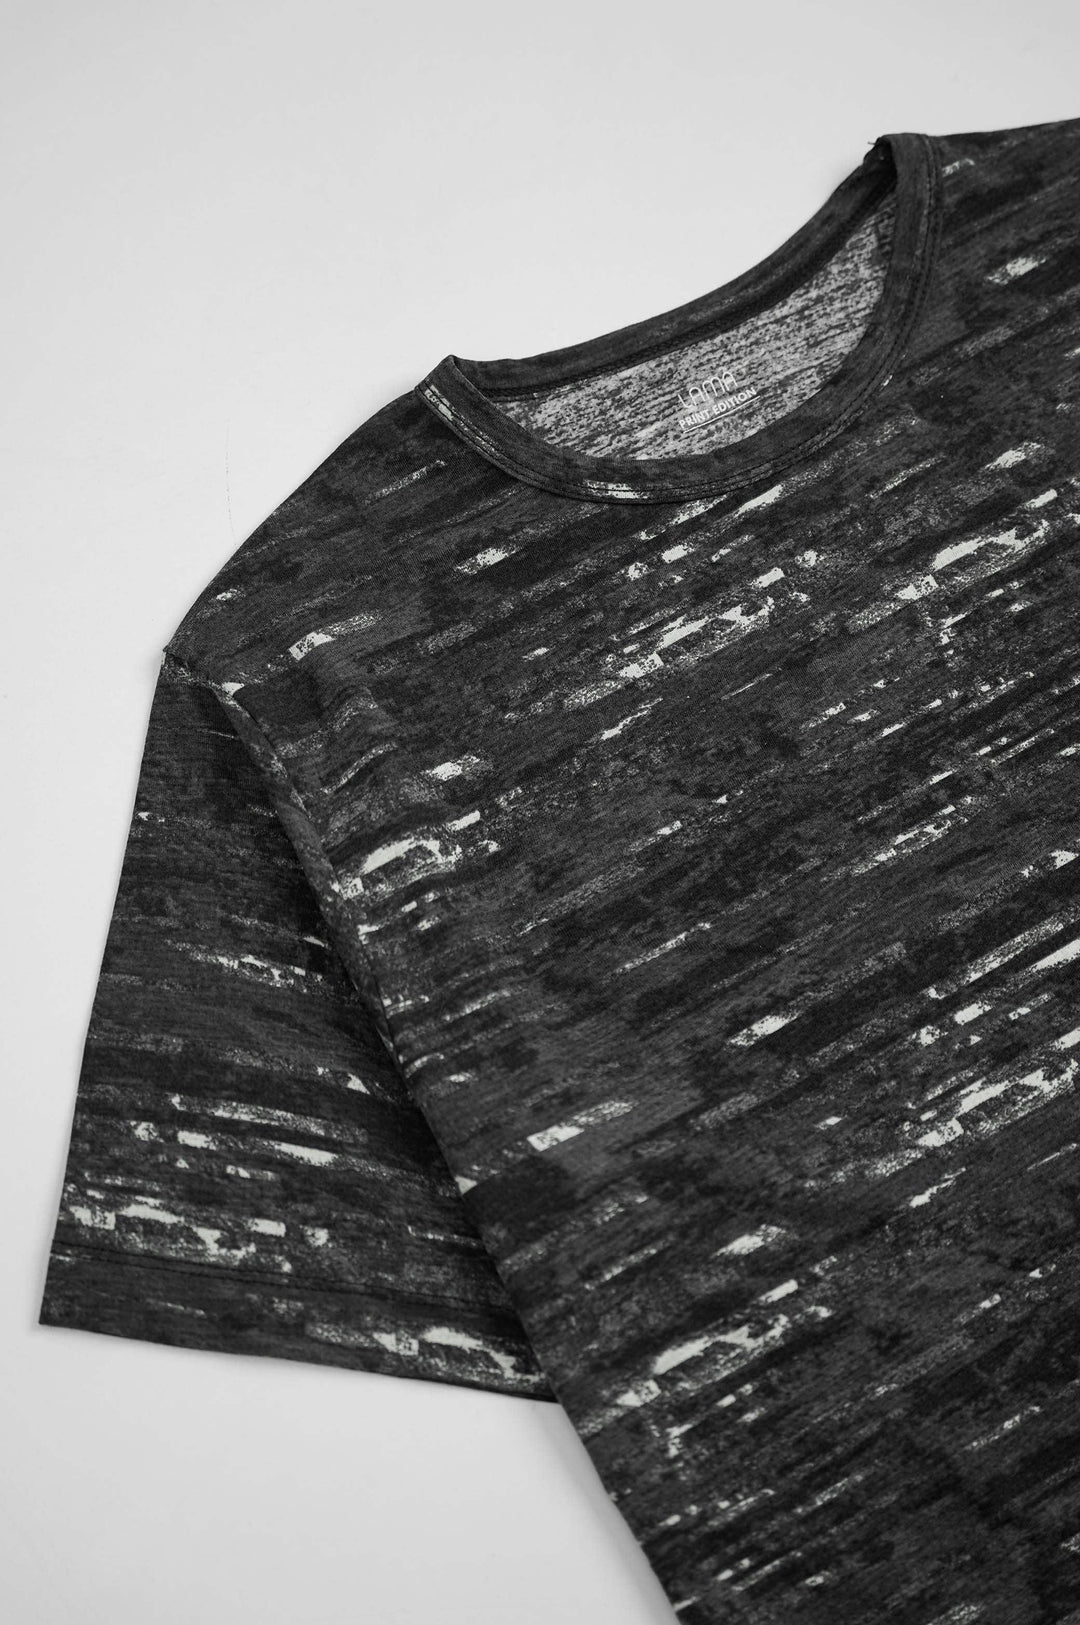 PRINTED TEXTURED TEE - YOUNG T-SHIRT